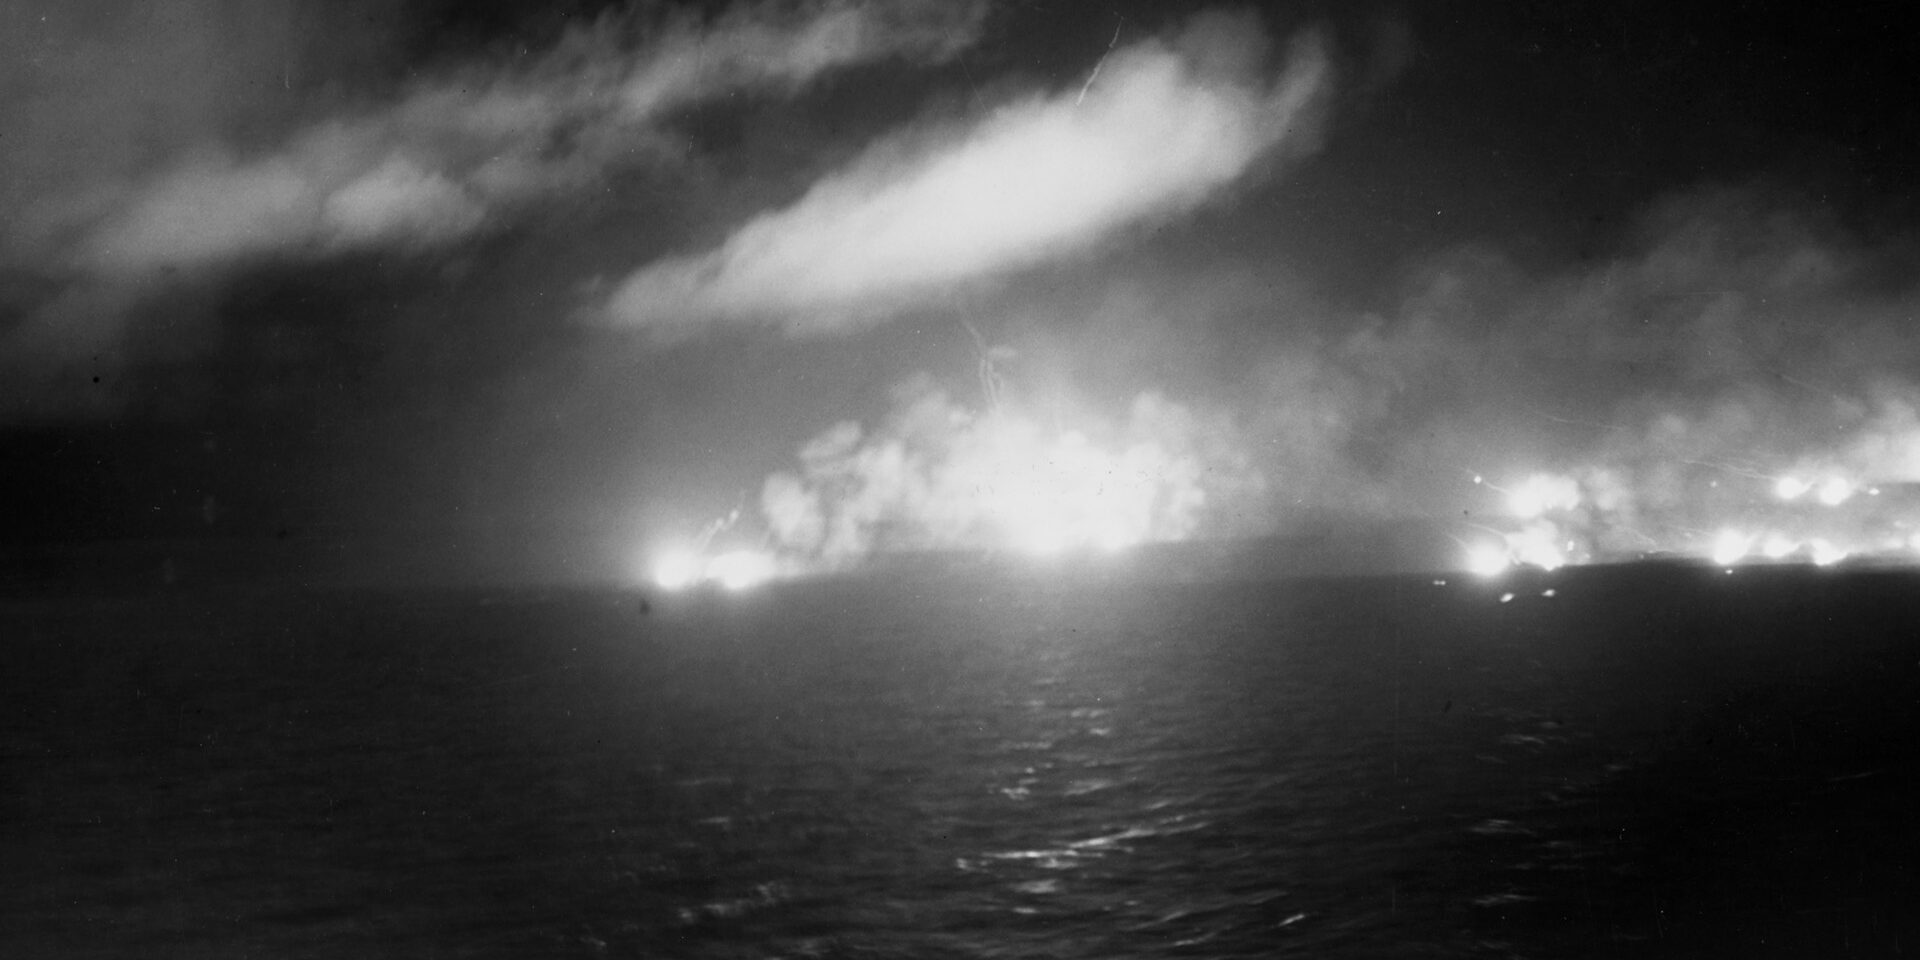 U.S. Navy warships, including several battleships that were survivors of the infamous Pearl Harbor attack three years earlier, rained heavy-caliber shells on the hapless Japanese vessels that ventured into Surigao Strait. In this image, the flashes from the guns of American cruisers light up the night sky.